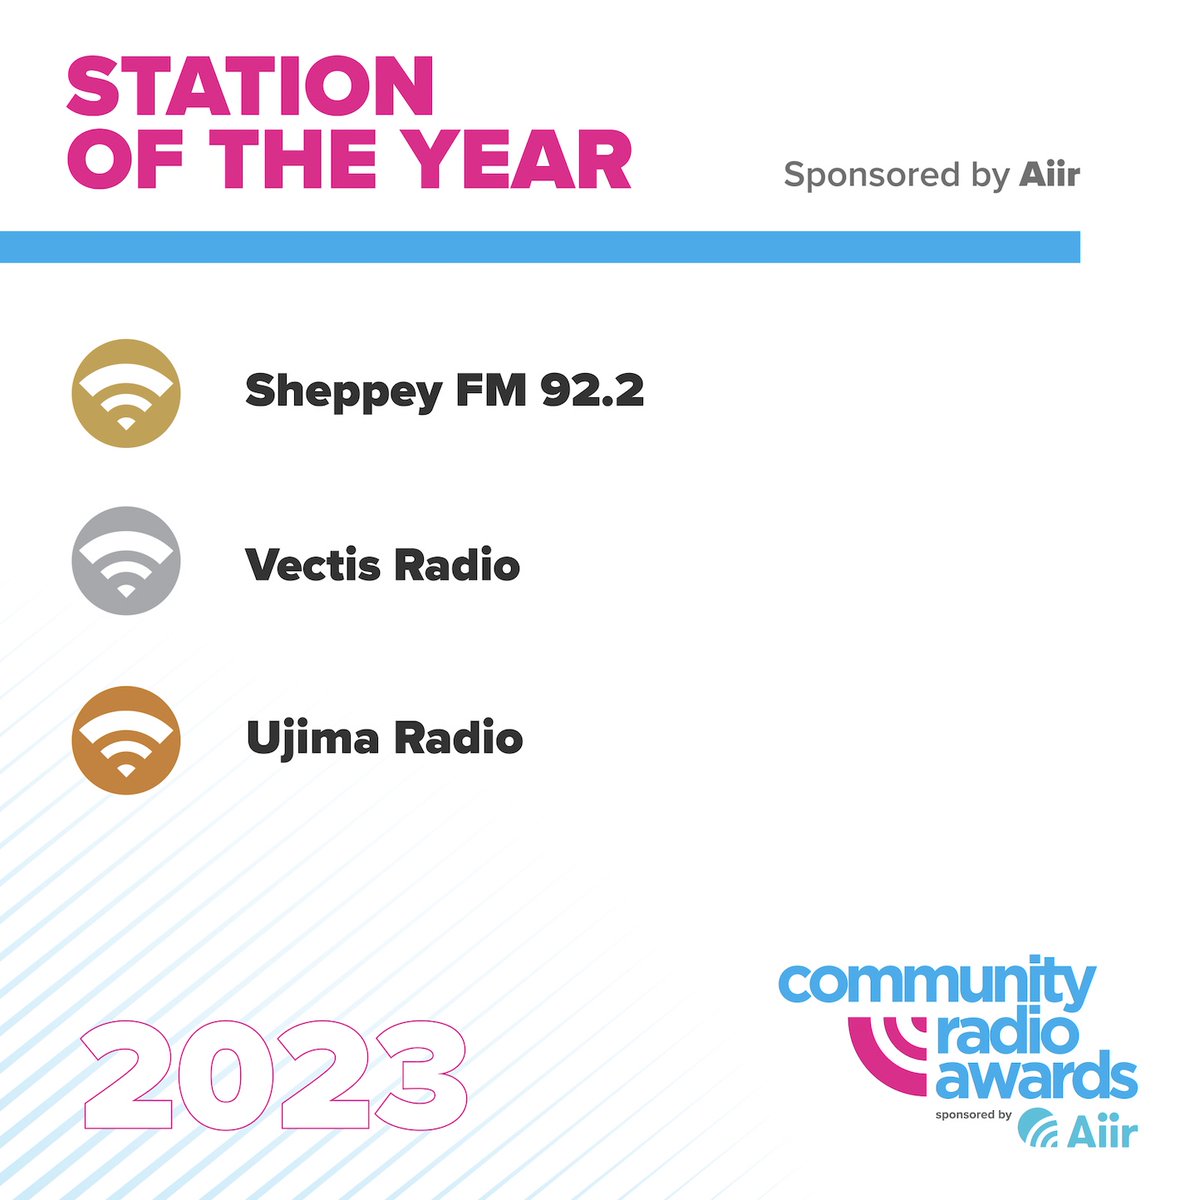 And drum roll 🥁please, the awards for #CRAs23 📻 Station of the Year go to: 🏆 Sheppey FM 92.2 - @SheppeyFM 🥈 Vectis Radio - @VectisRadio 🥉 Ujima Radio - @Ujimaradio